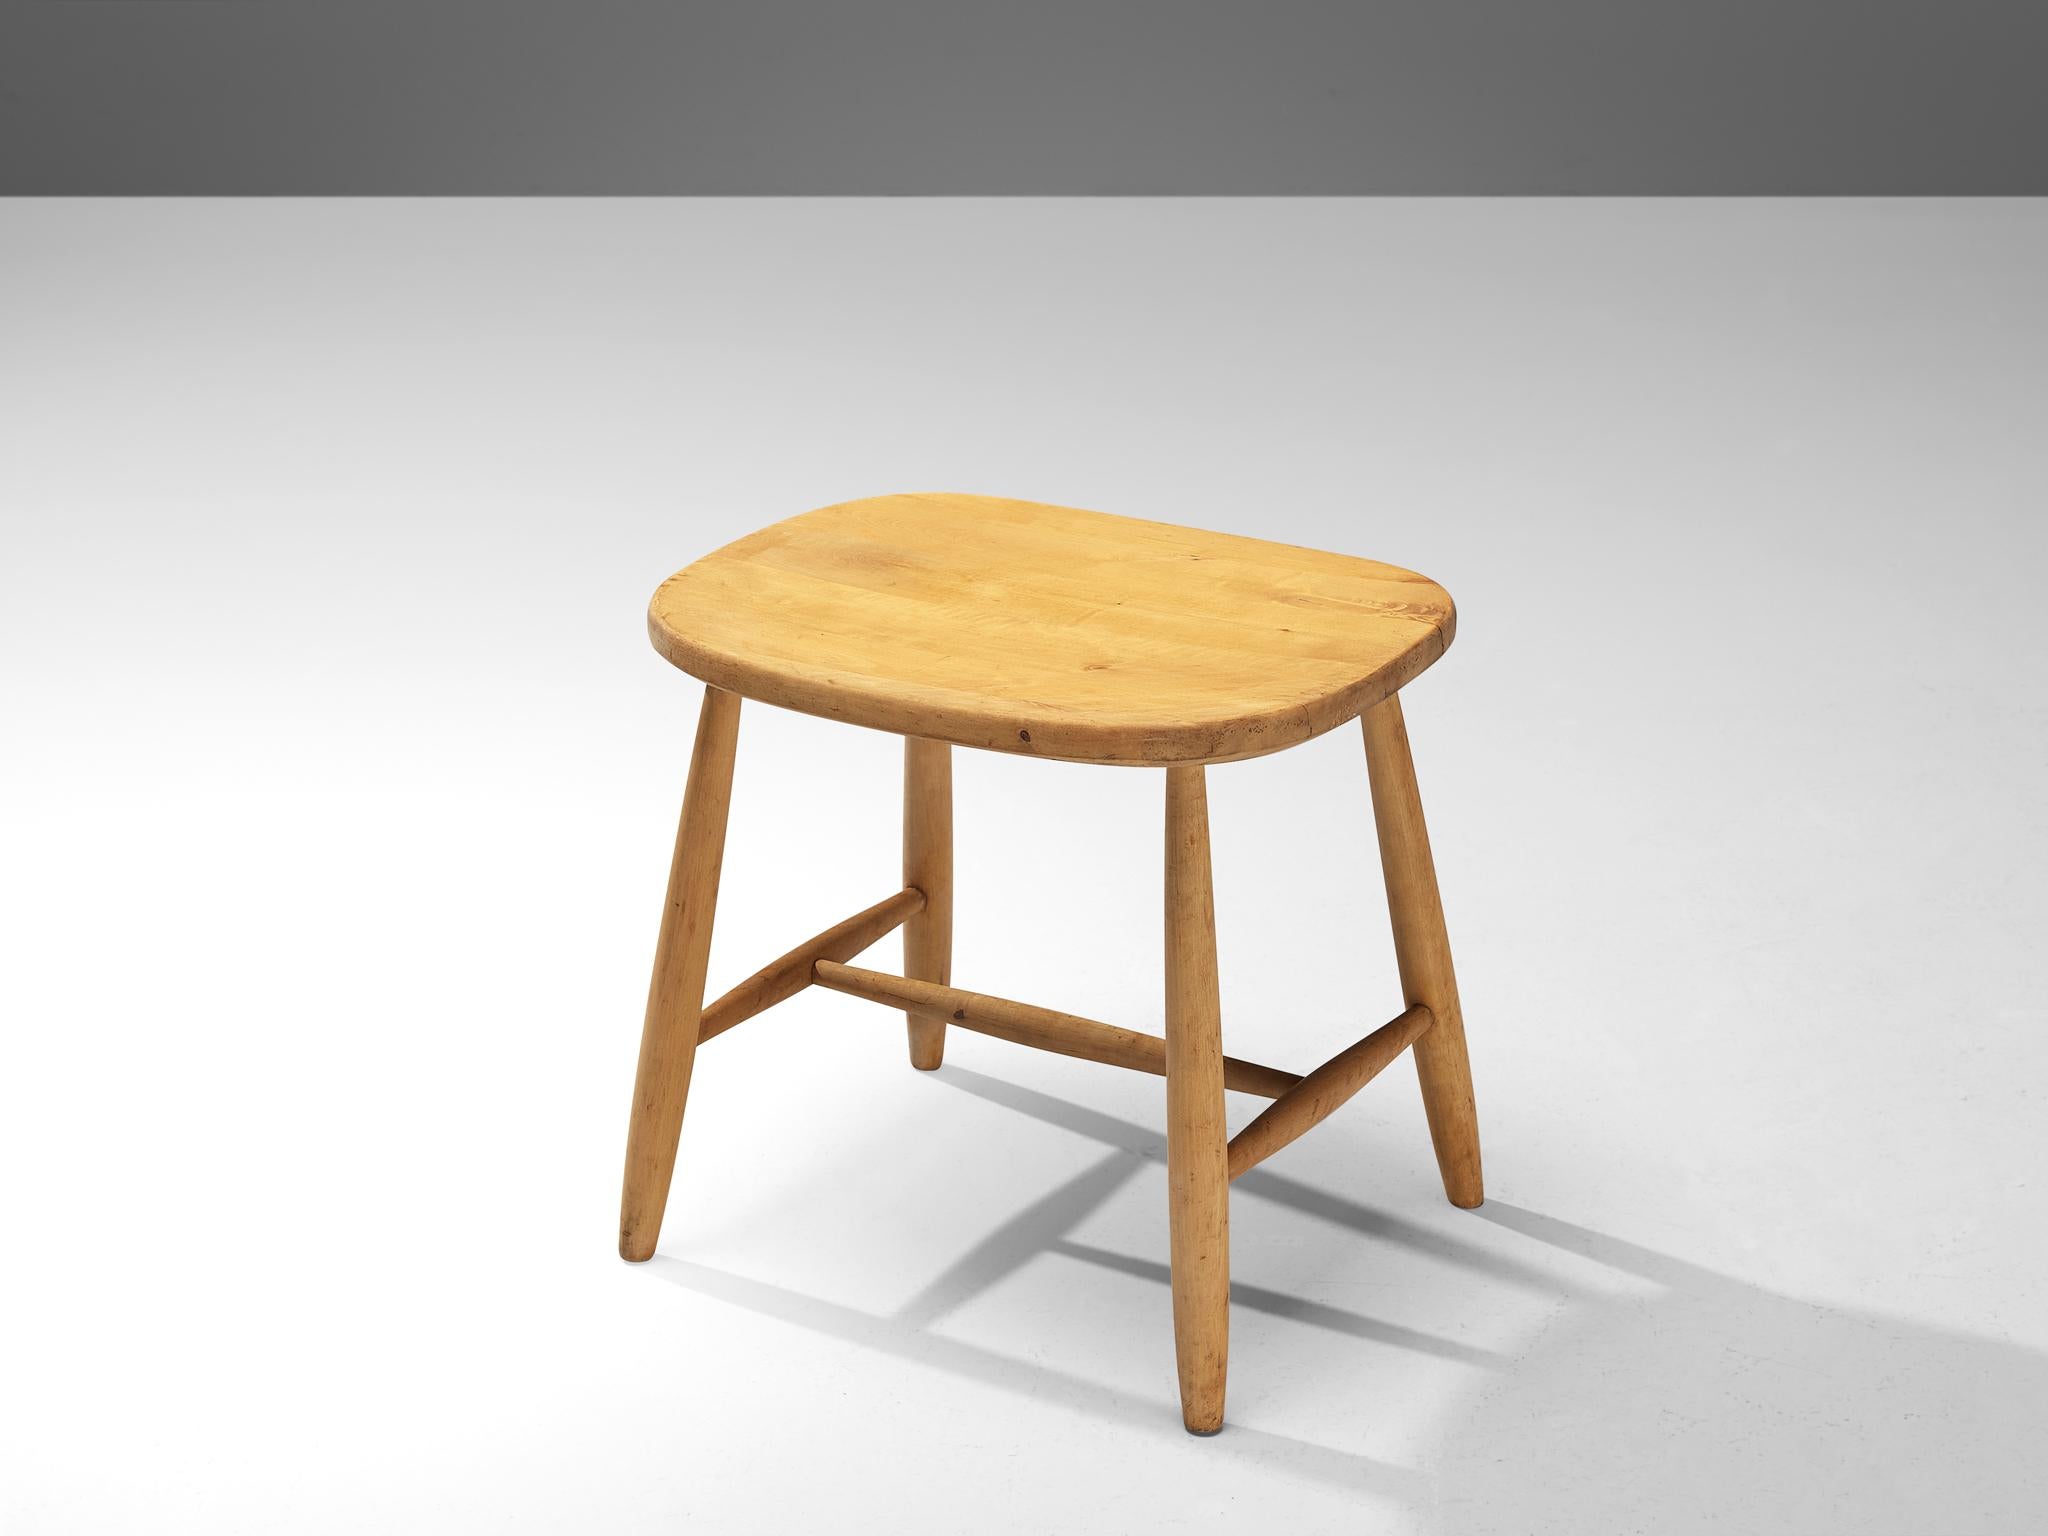 Svensk Mobelindustri, stool, maple, Sweden, 1960s

This stool of Swedish origin showcases a simple design with smooth rounded contours. Crafted entirely from maplewood, distinguished by its light and blonde tone, it exudes a natural and organic